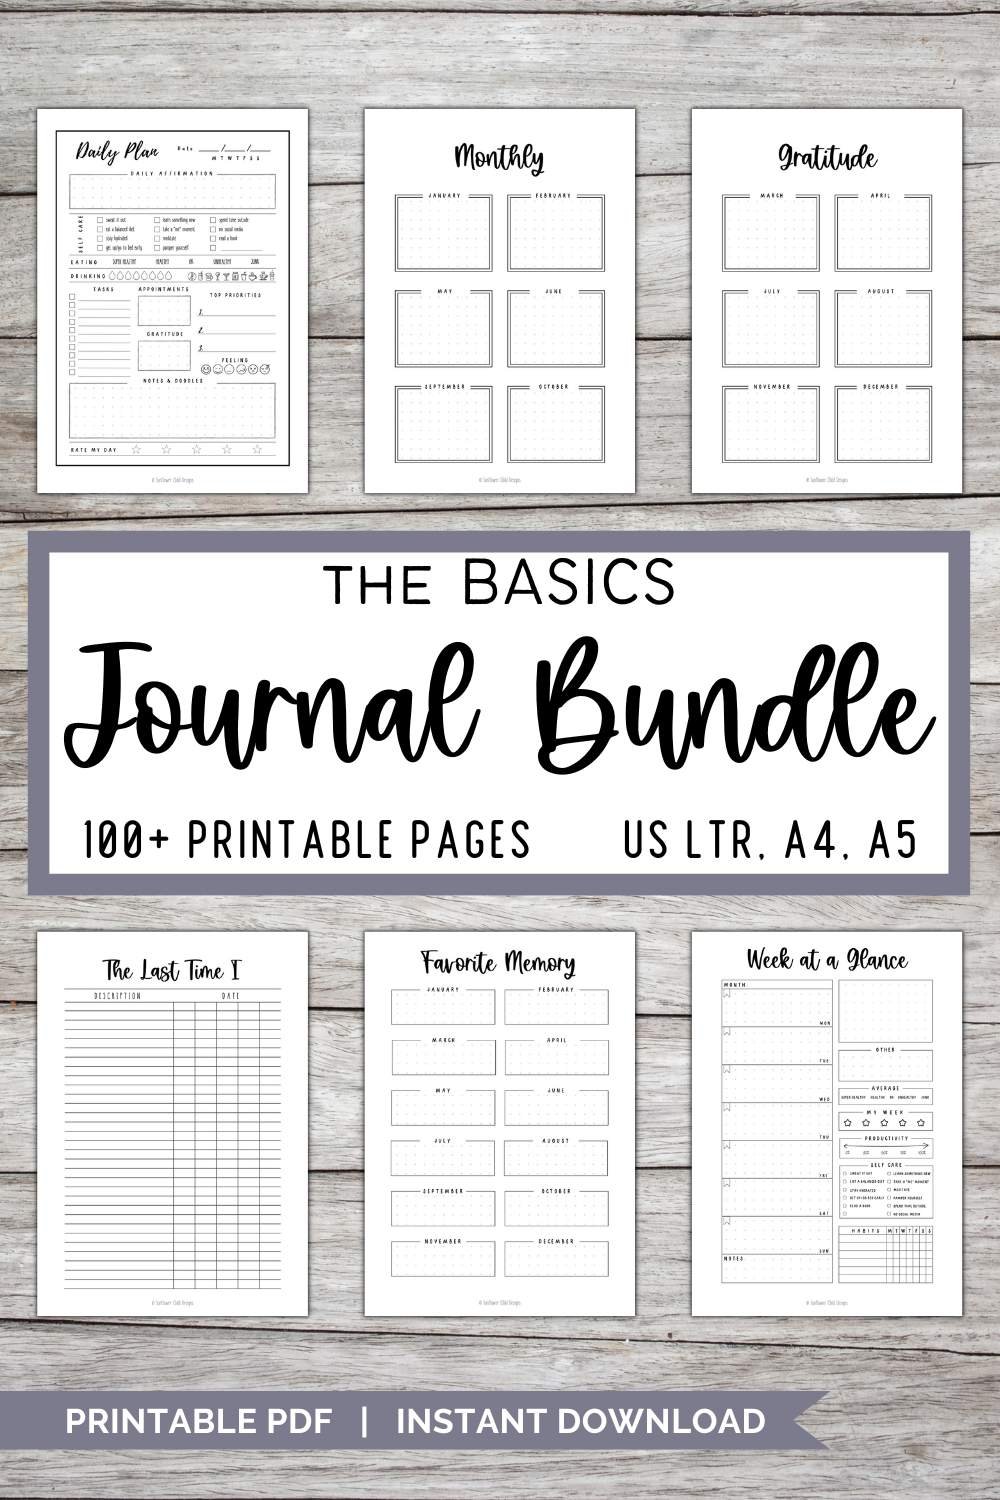 May Bullet Journal Ideas using Printable Bullet Journal Stickers Twilight  Forest Printable Stickers — Sunflower Child Designs